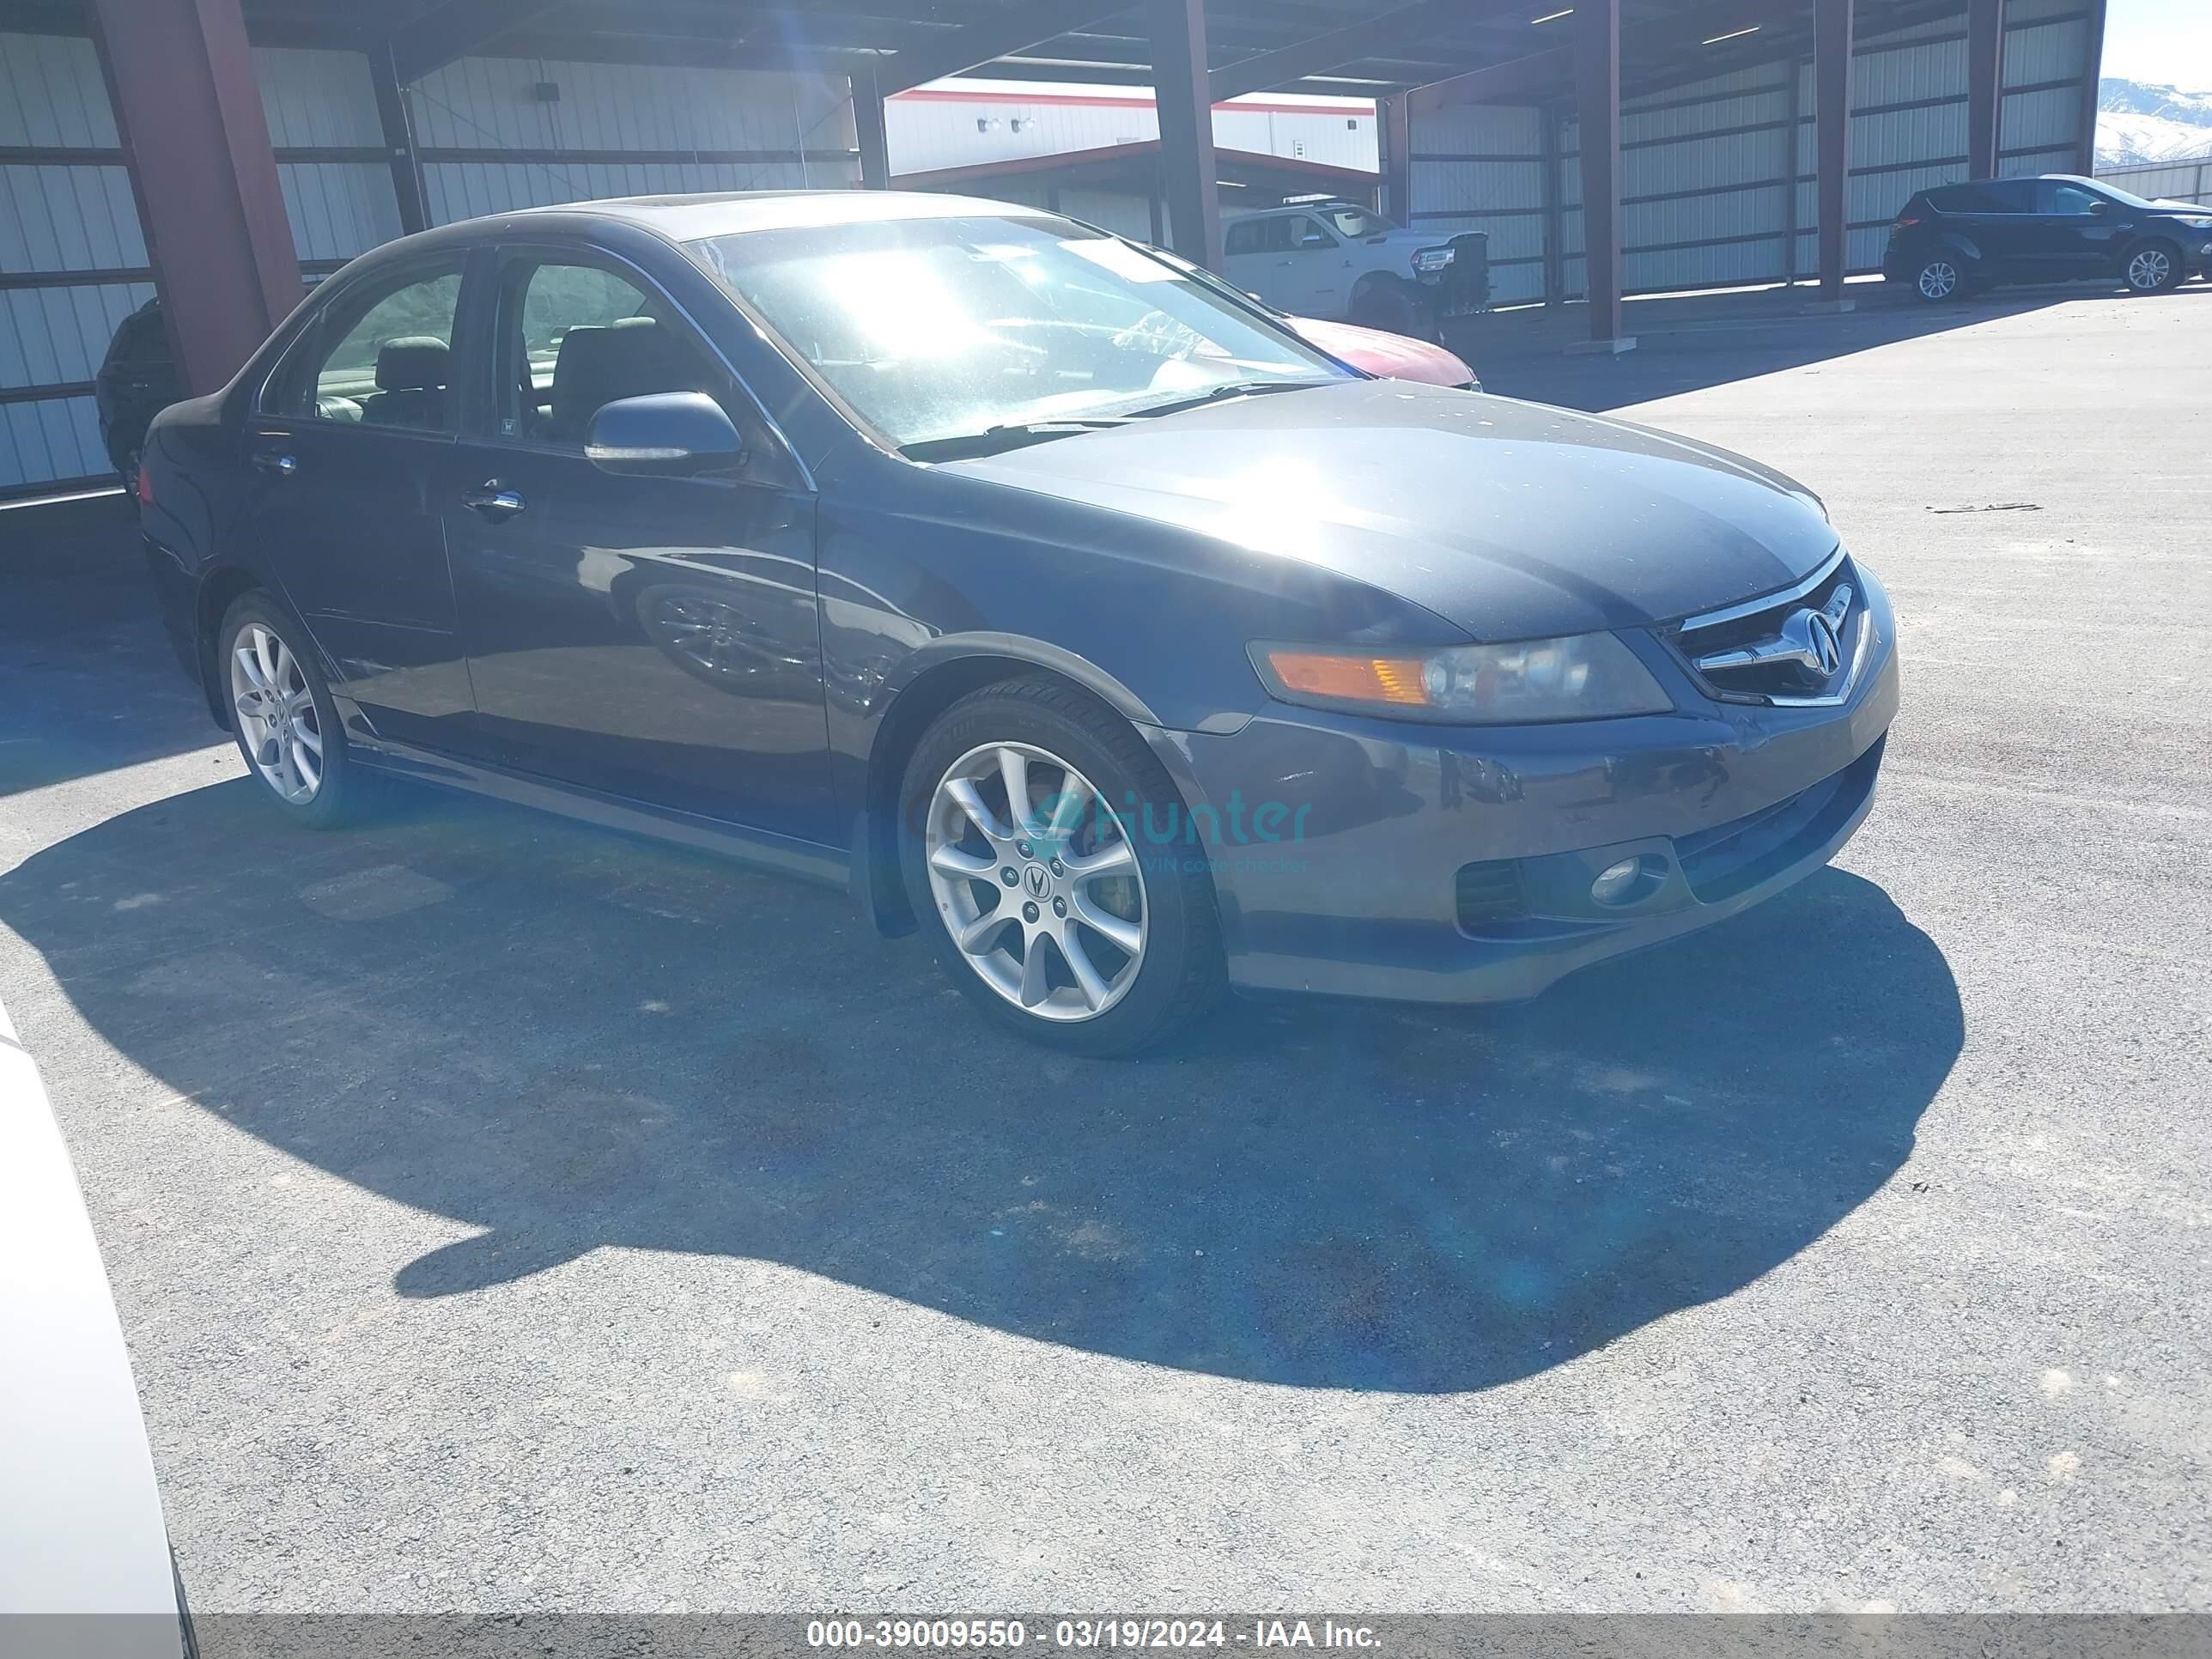 acura tsx 2006 jh4cl96816c007549